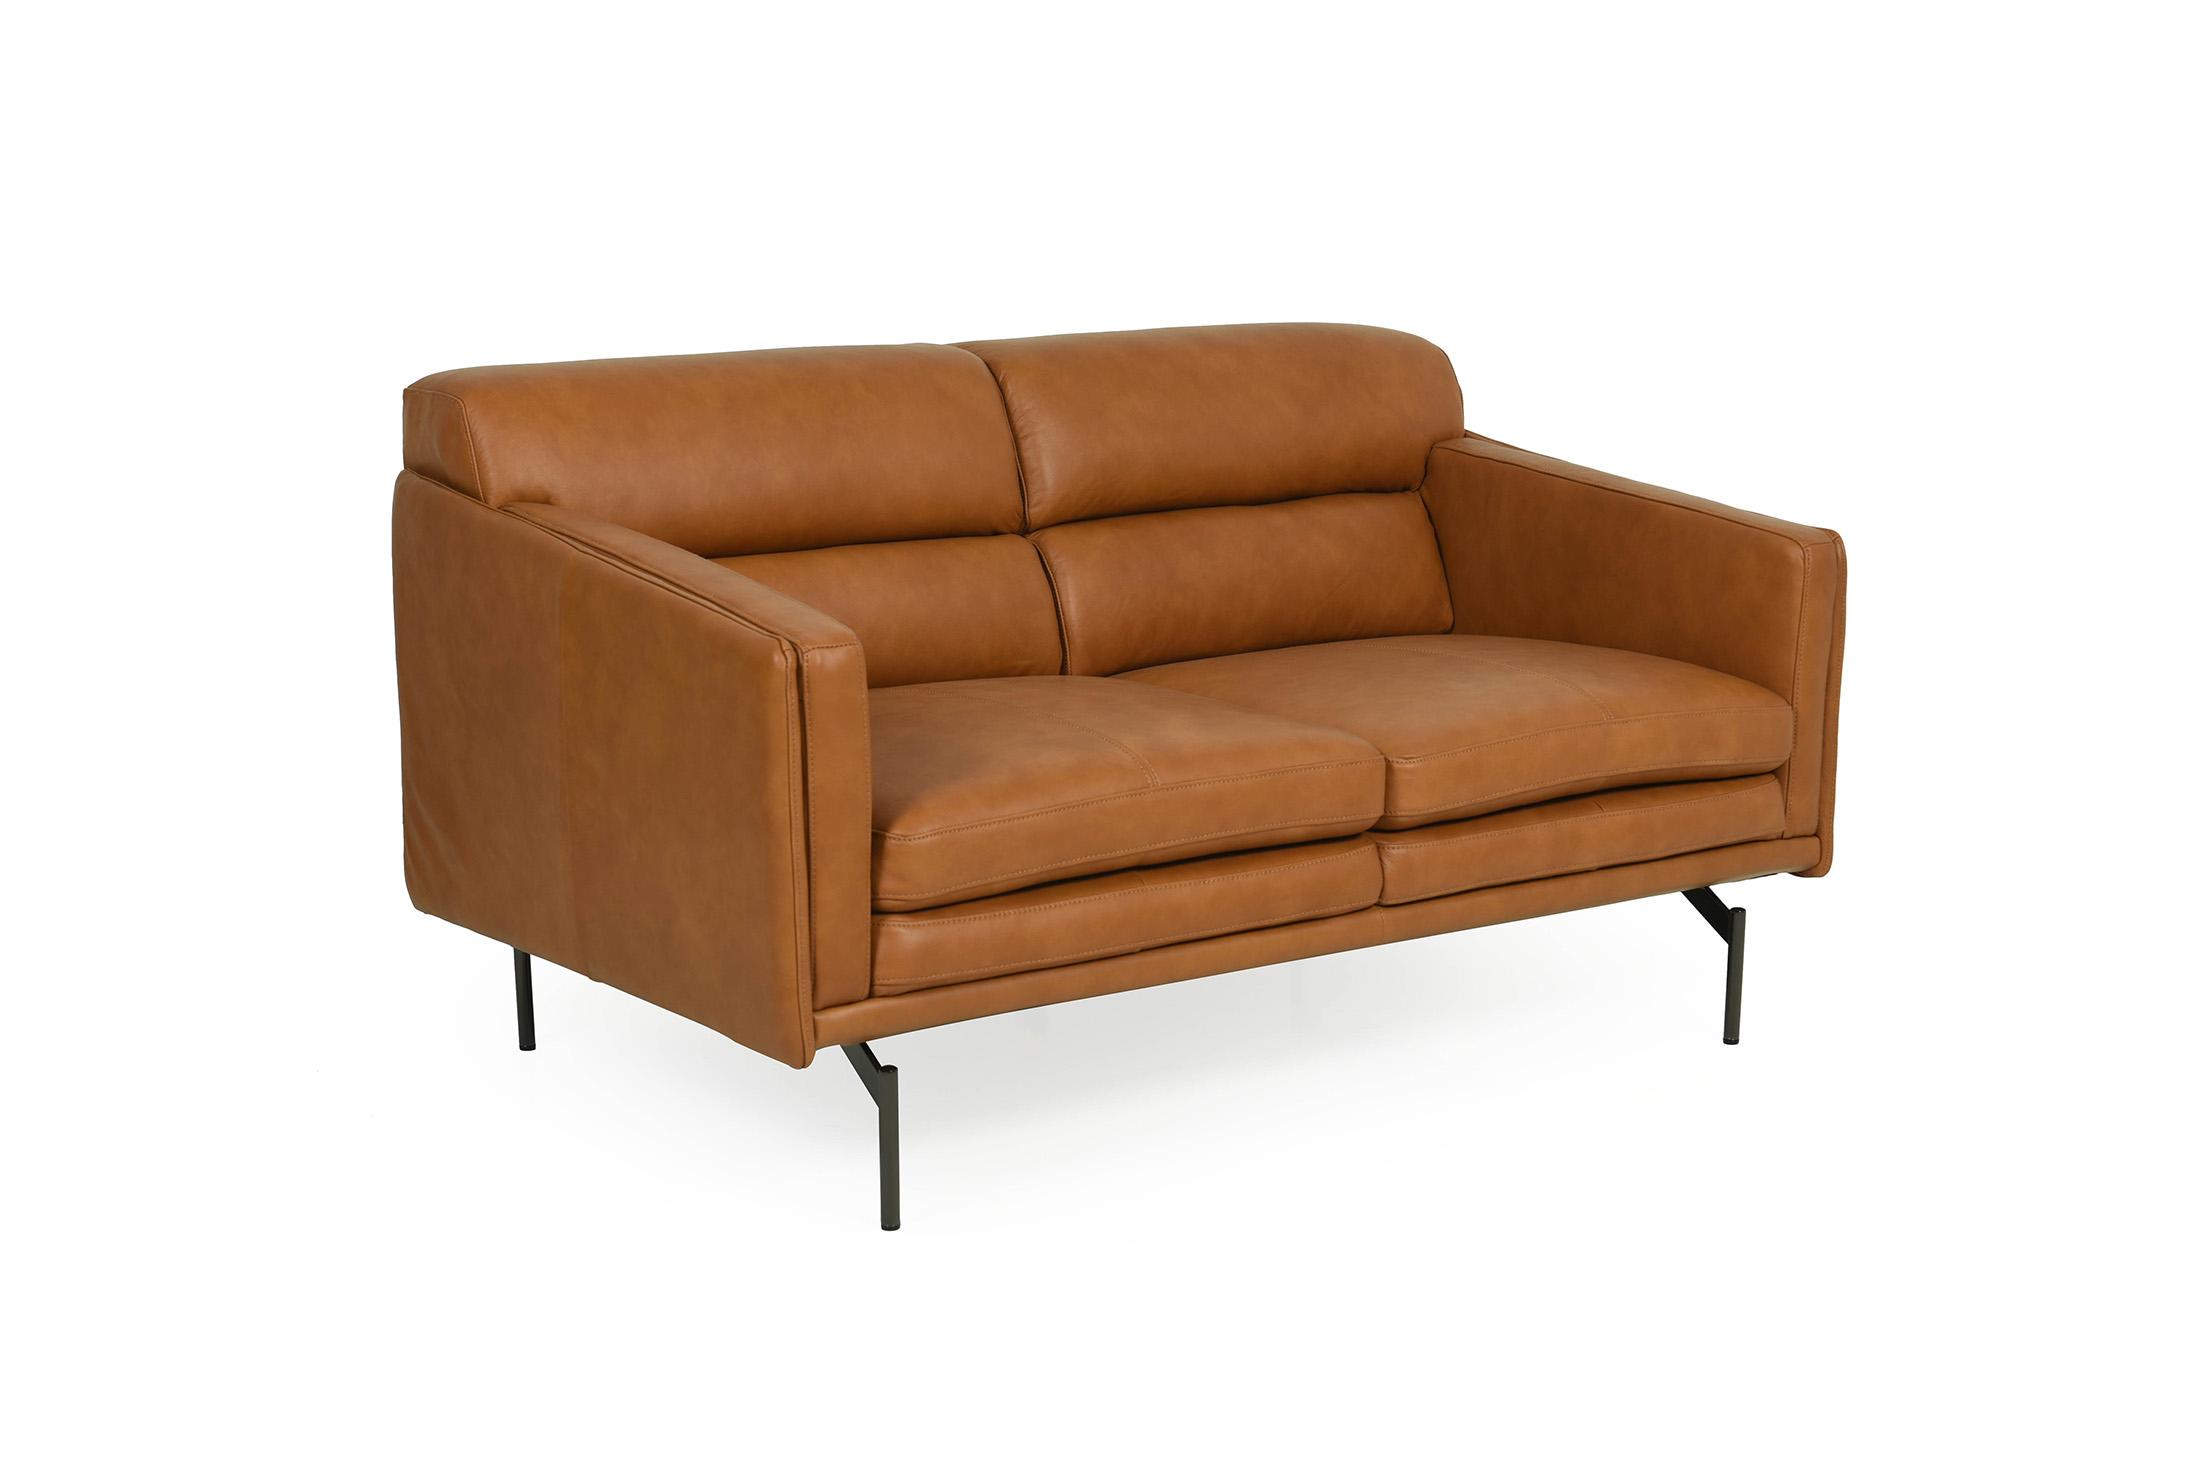 Contemporary Loveseat 442 McCoy 44202BS1961 in Tan Full Leather